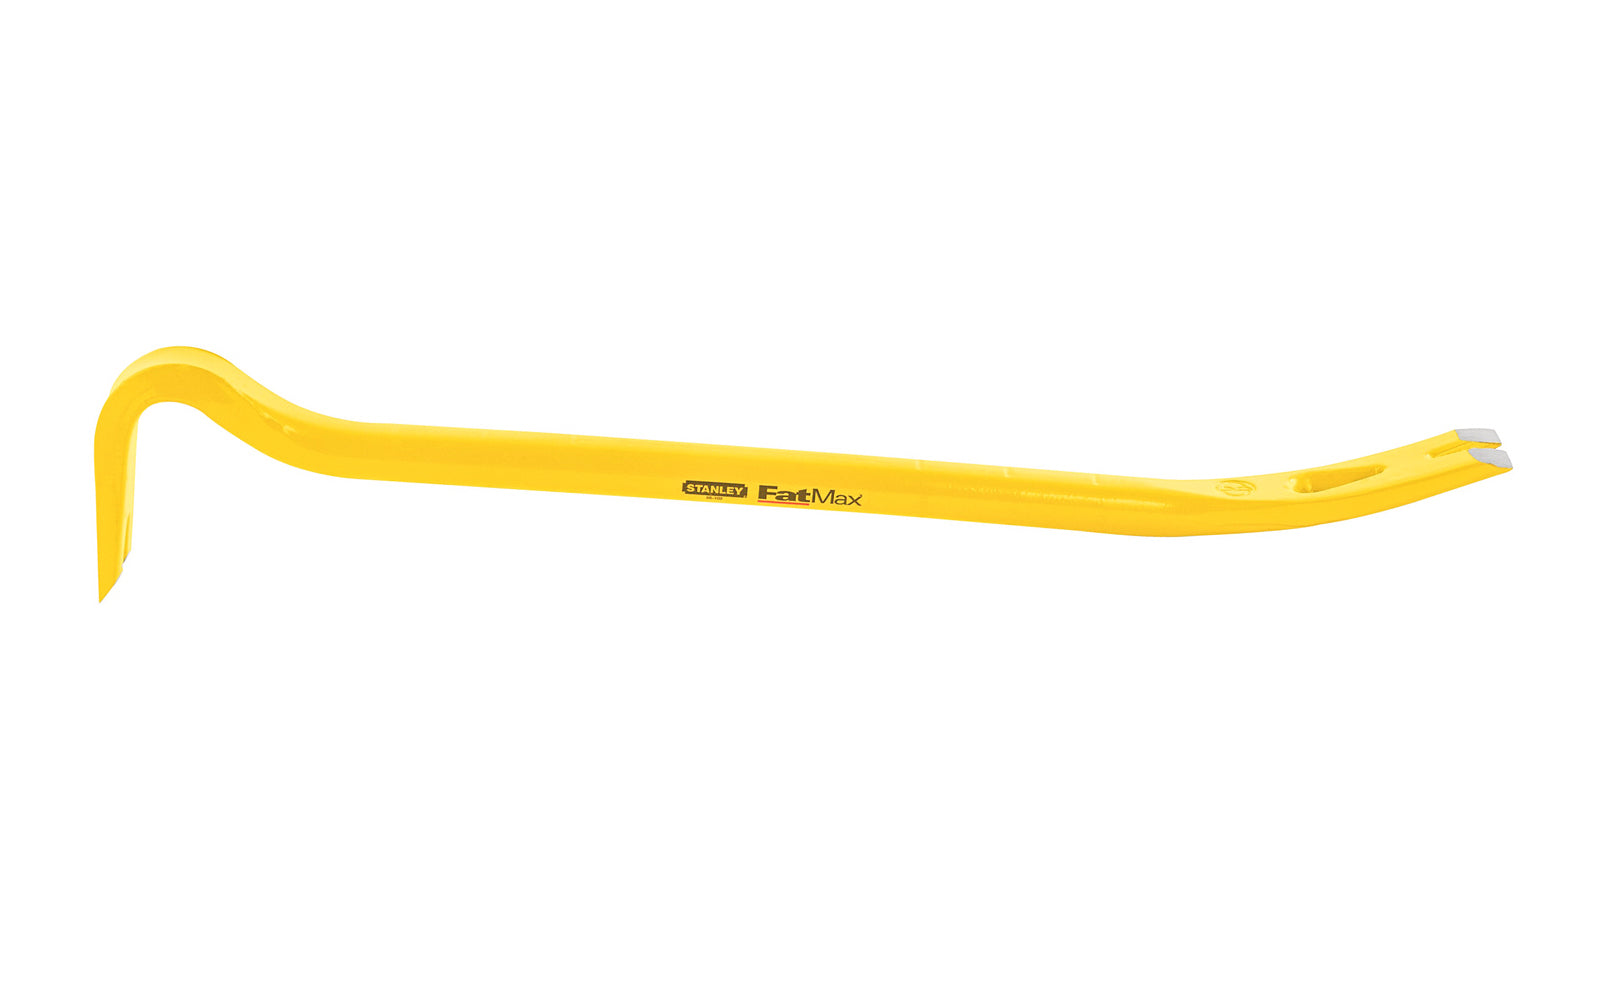 This Stanley Fatmax 24" wrecking bar is made of high carbon steel & is great for heavy demolition jobs. It has a tri-lobe design which provides a secure grip for ease of use as well as a slotted claw & beveled ends for functionality & performance. Model No. 55-102. High-visibility, powder-coated finish. 076174551020